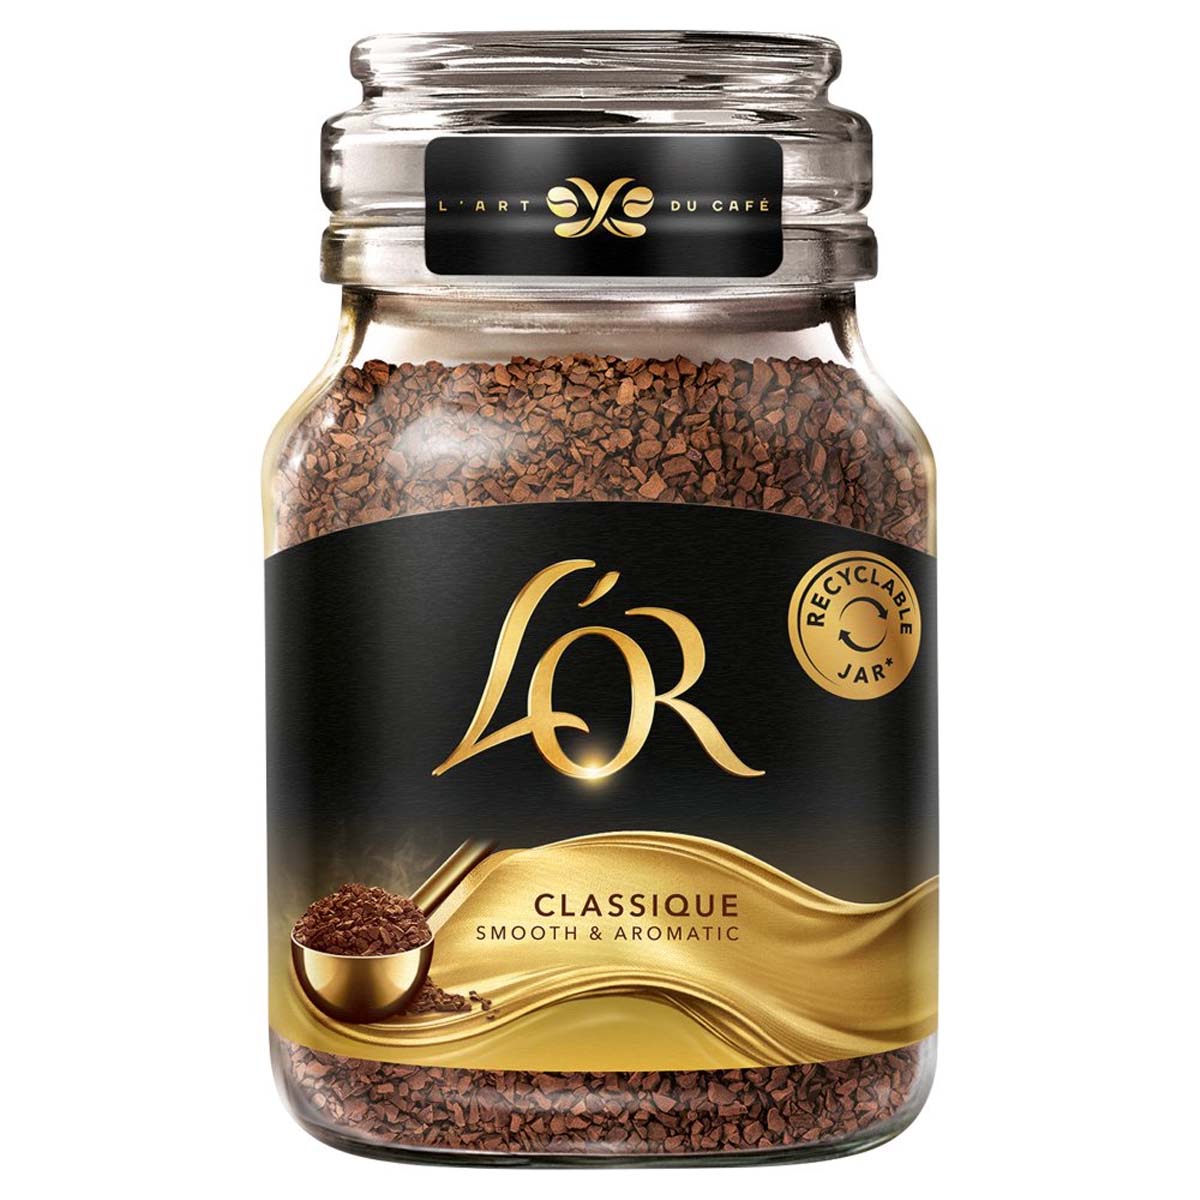 L'OR - Classique Instant Coffee - 100g - Continental Food Store